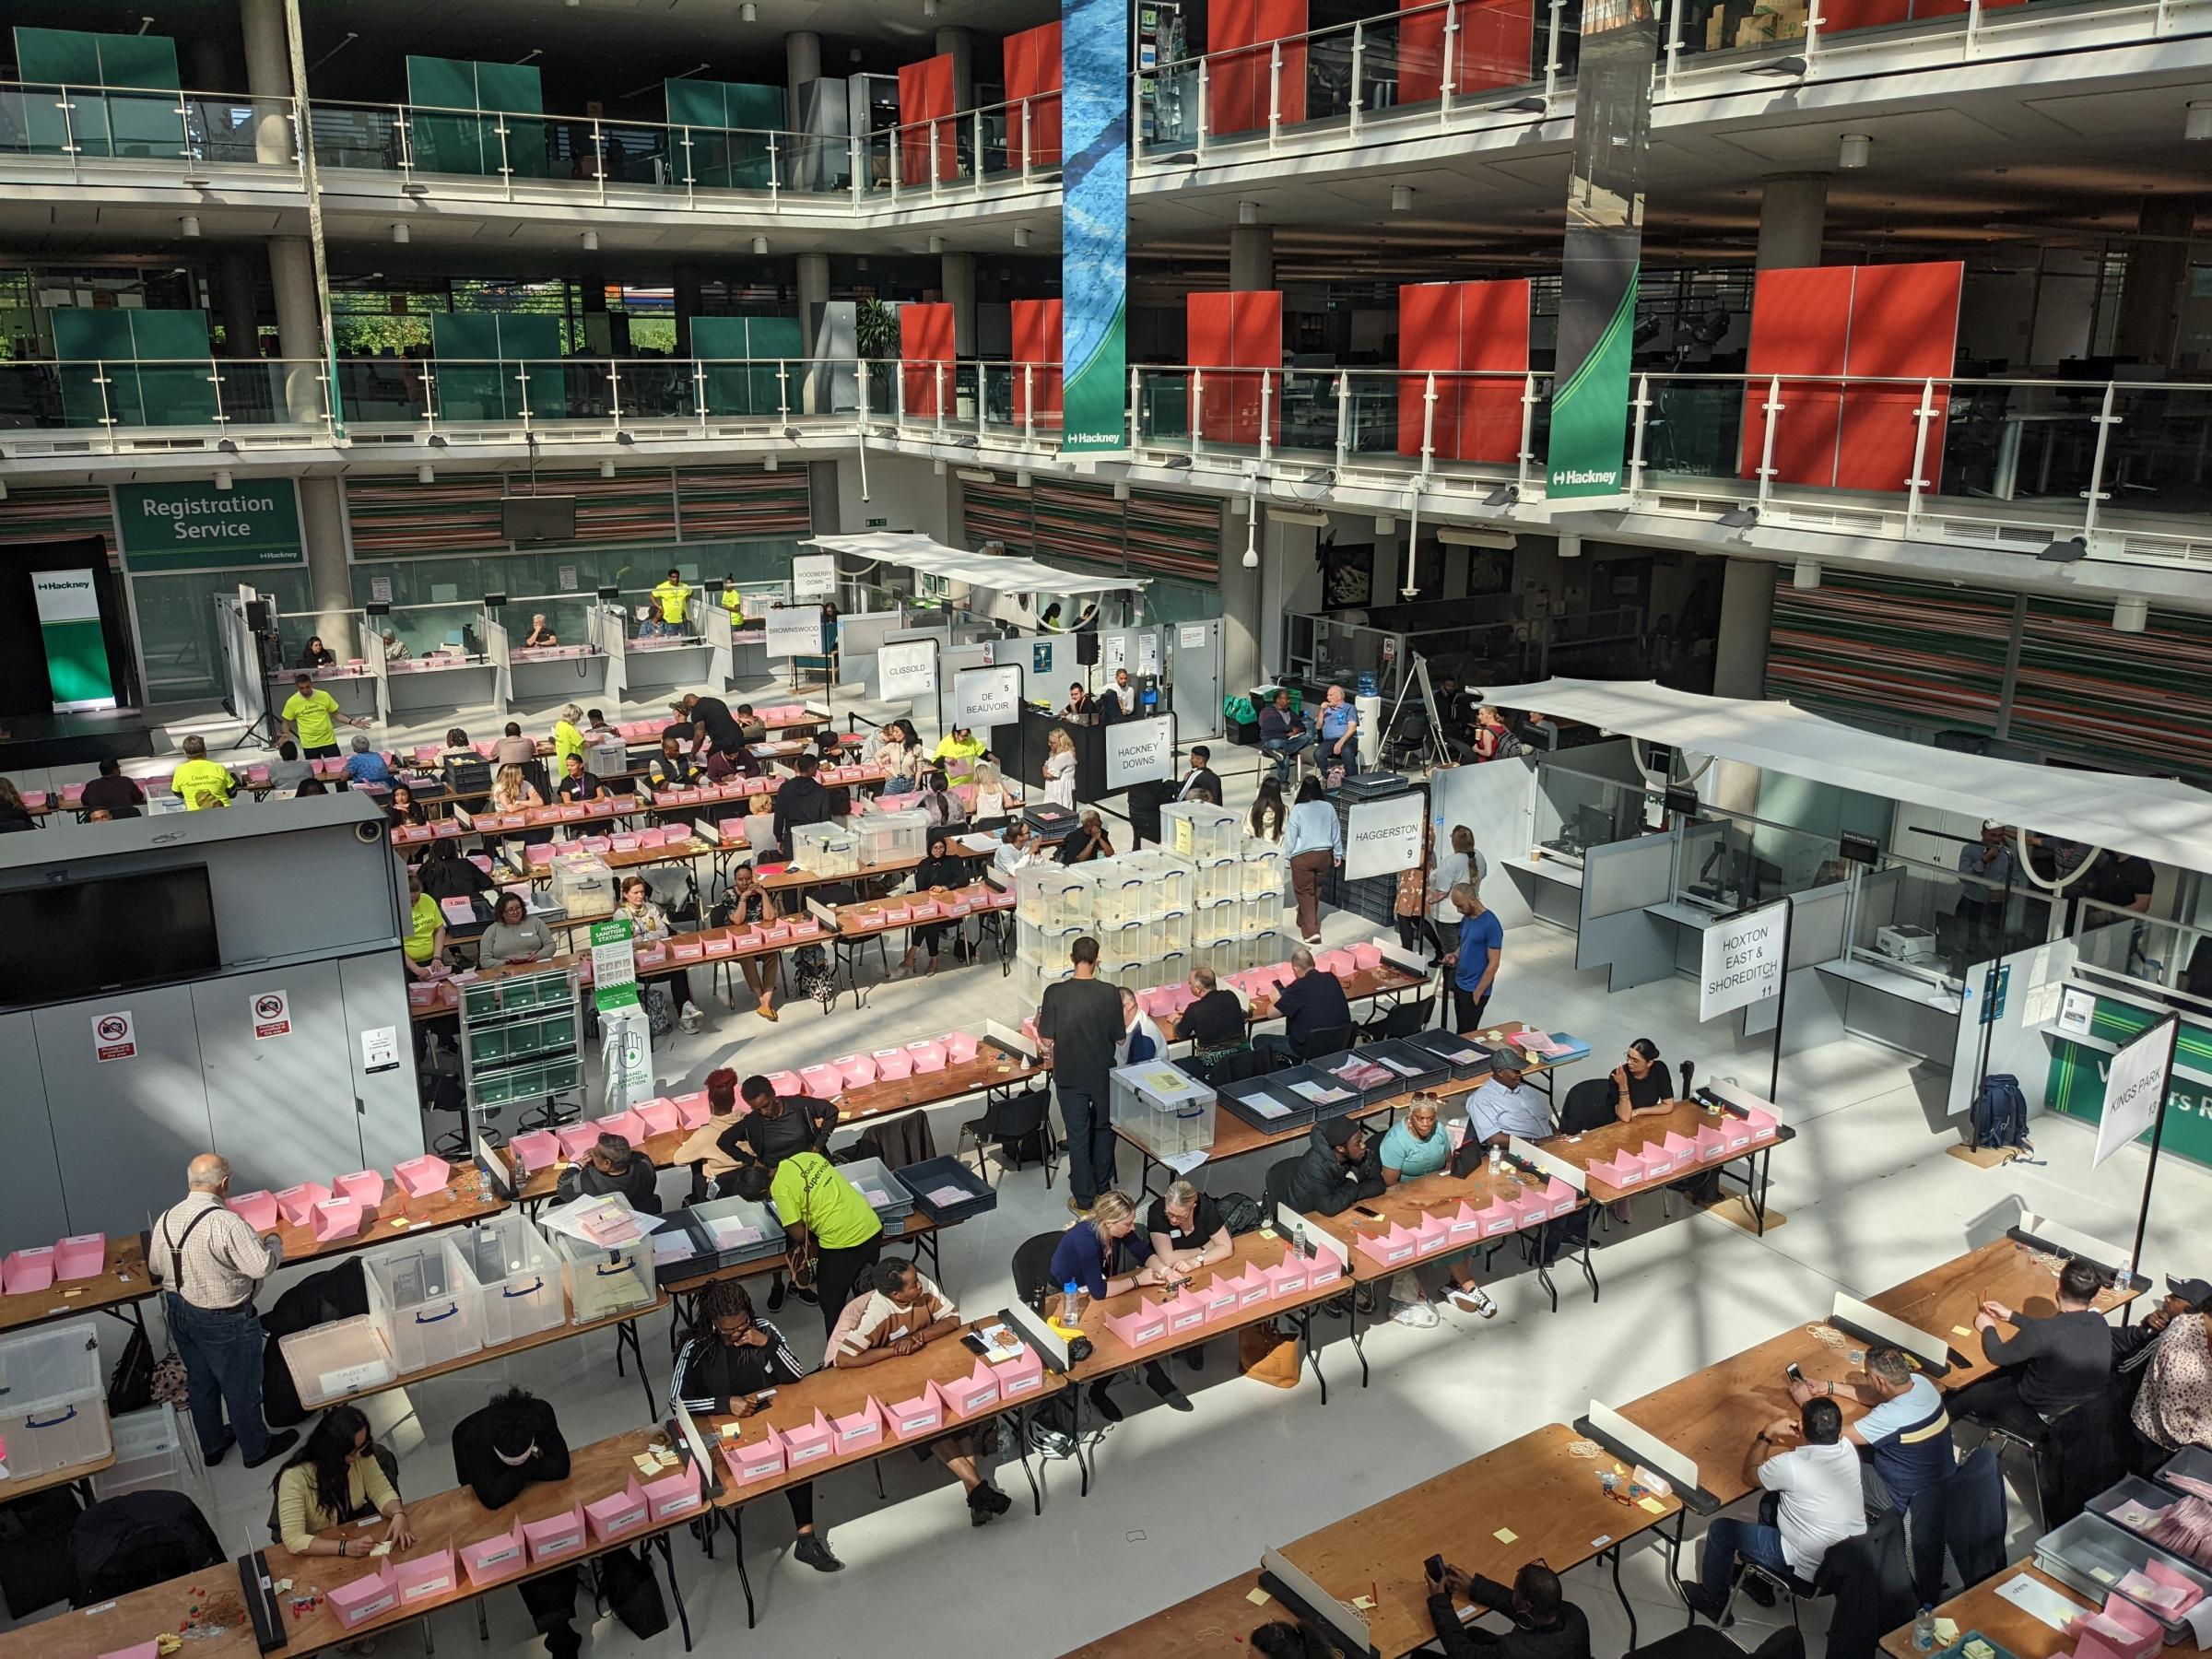 The May 2022 election count in Hackney. Photo: LDR Julia Gregory